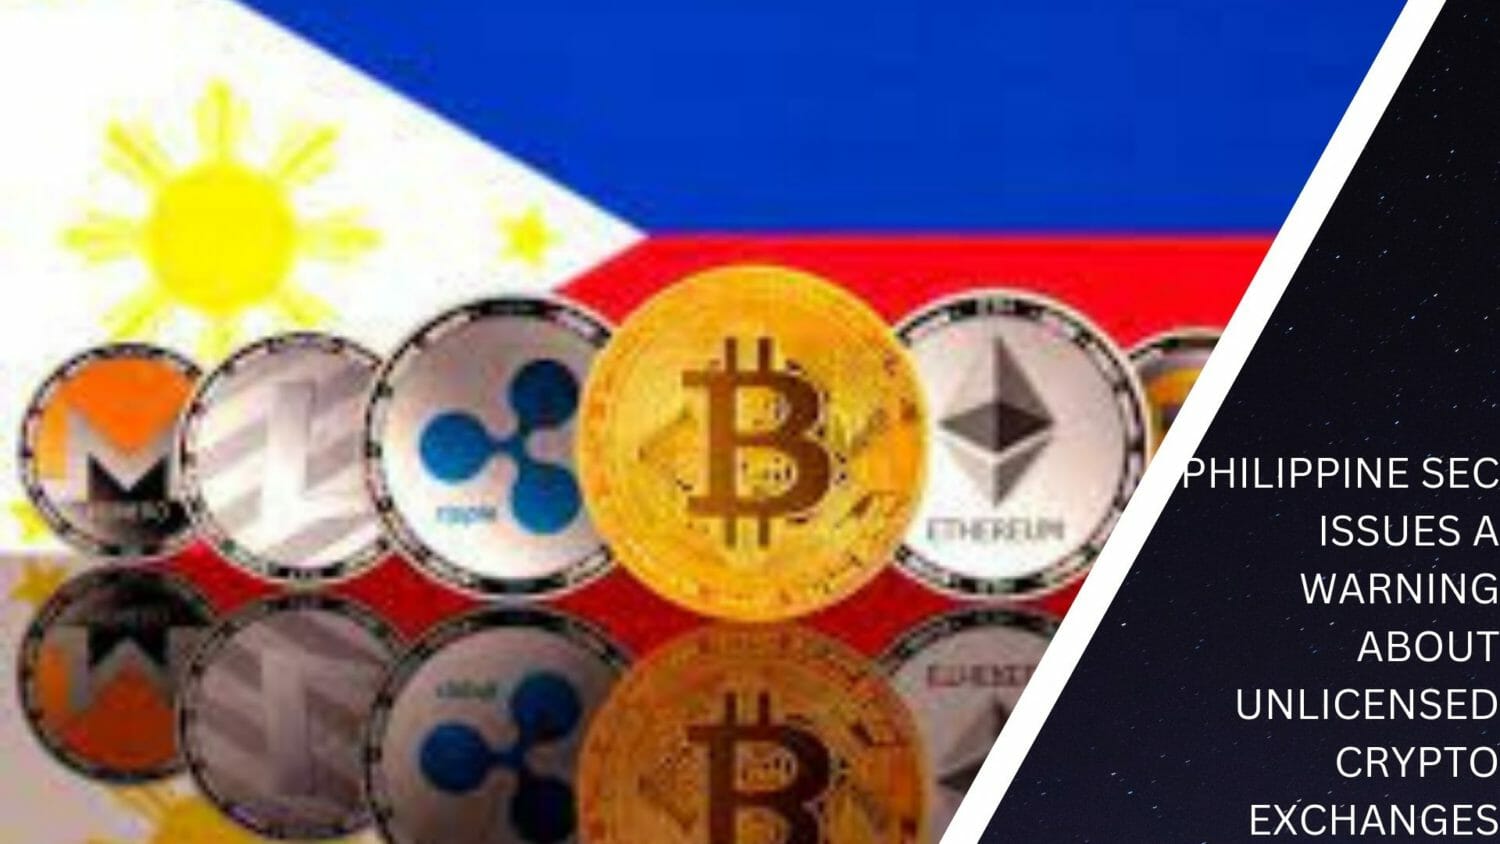 Philippine Sec Issues A Warning About Unlicensed Crypto Exchanges